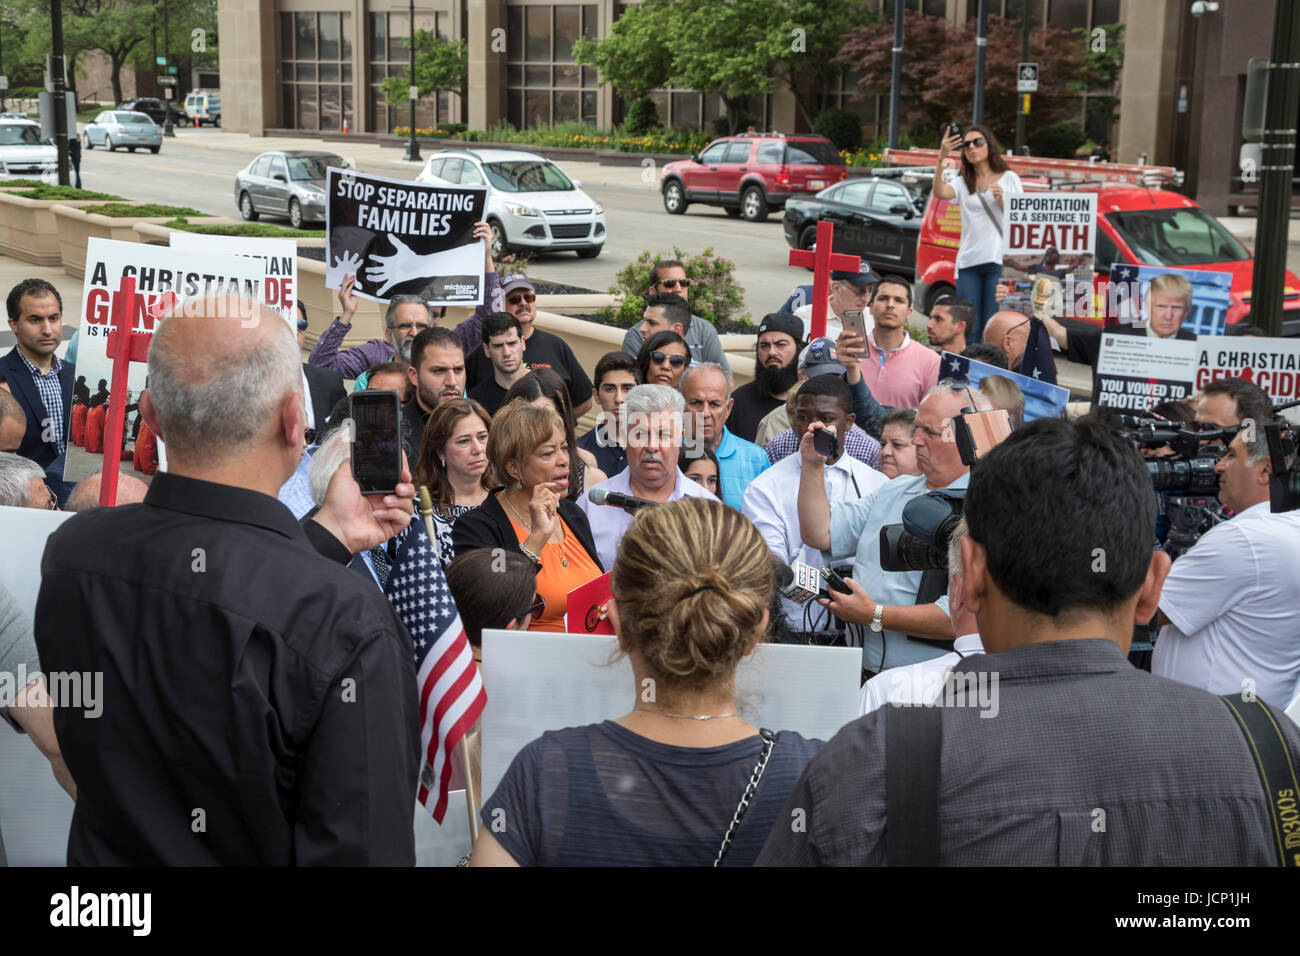 Detroit, Michigan, USA. 16th June, 2017. Members of Detroit's Chaldean community of Iraqi Christians protest the government's arrest of dozens of Iraqis who they plan to deport. Family members say that Iraqi Christians face genocide if they are returned to Iraq. Congresswoman Brenda Lawrence (D-Michigan) speaks against the deportations. Credit: Jim West/Alamy Live News Stock Photo